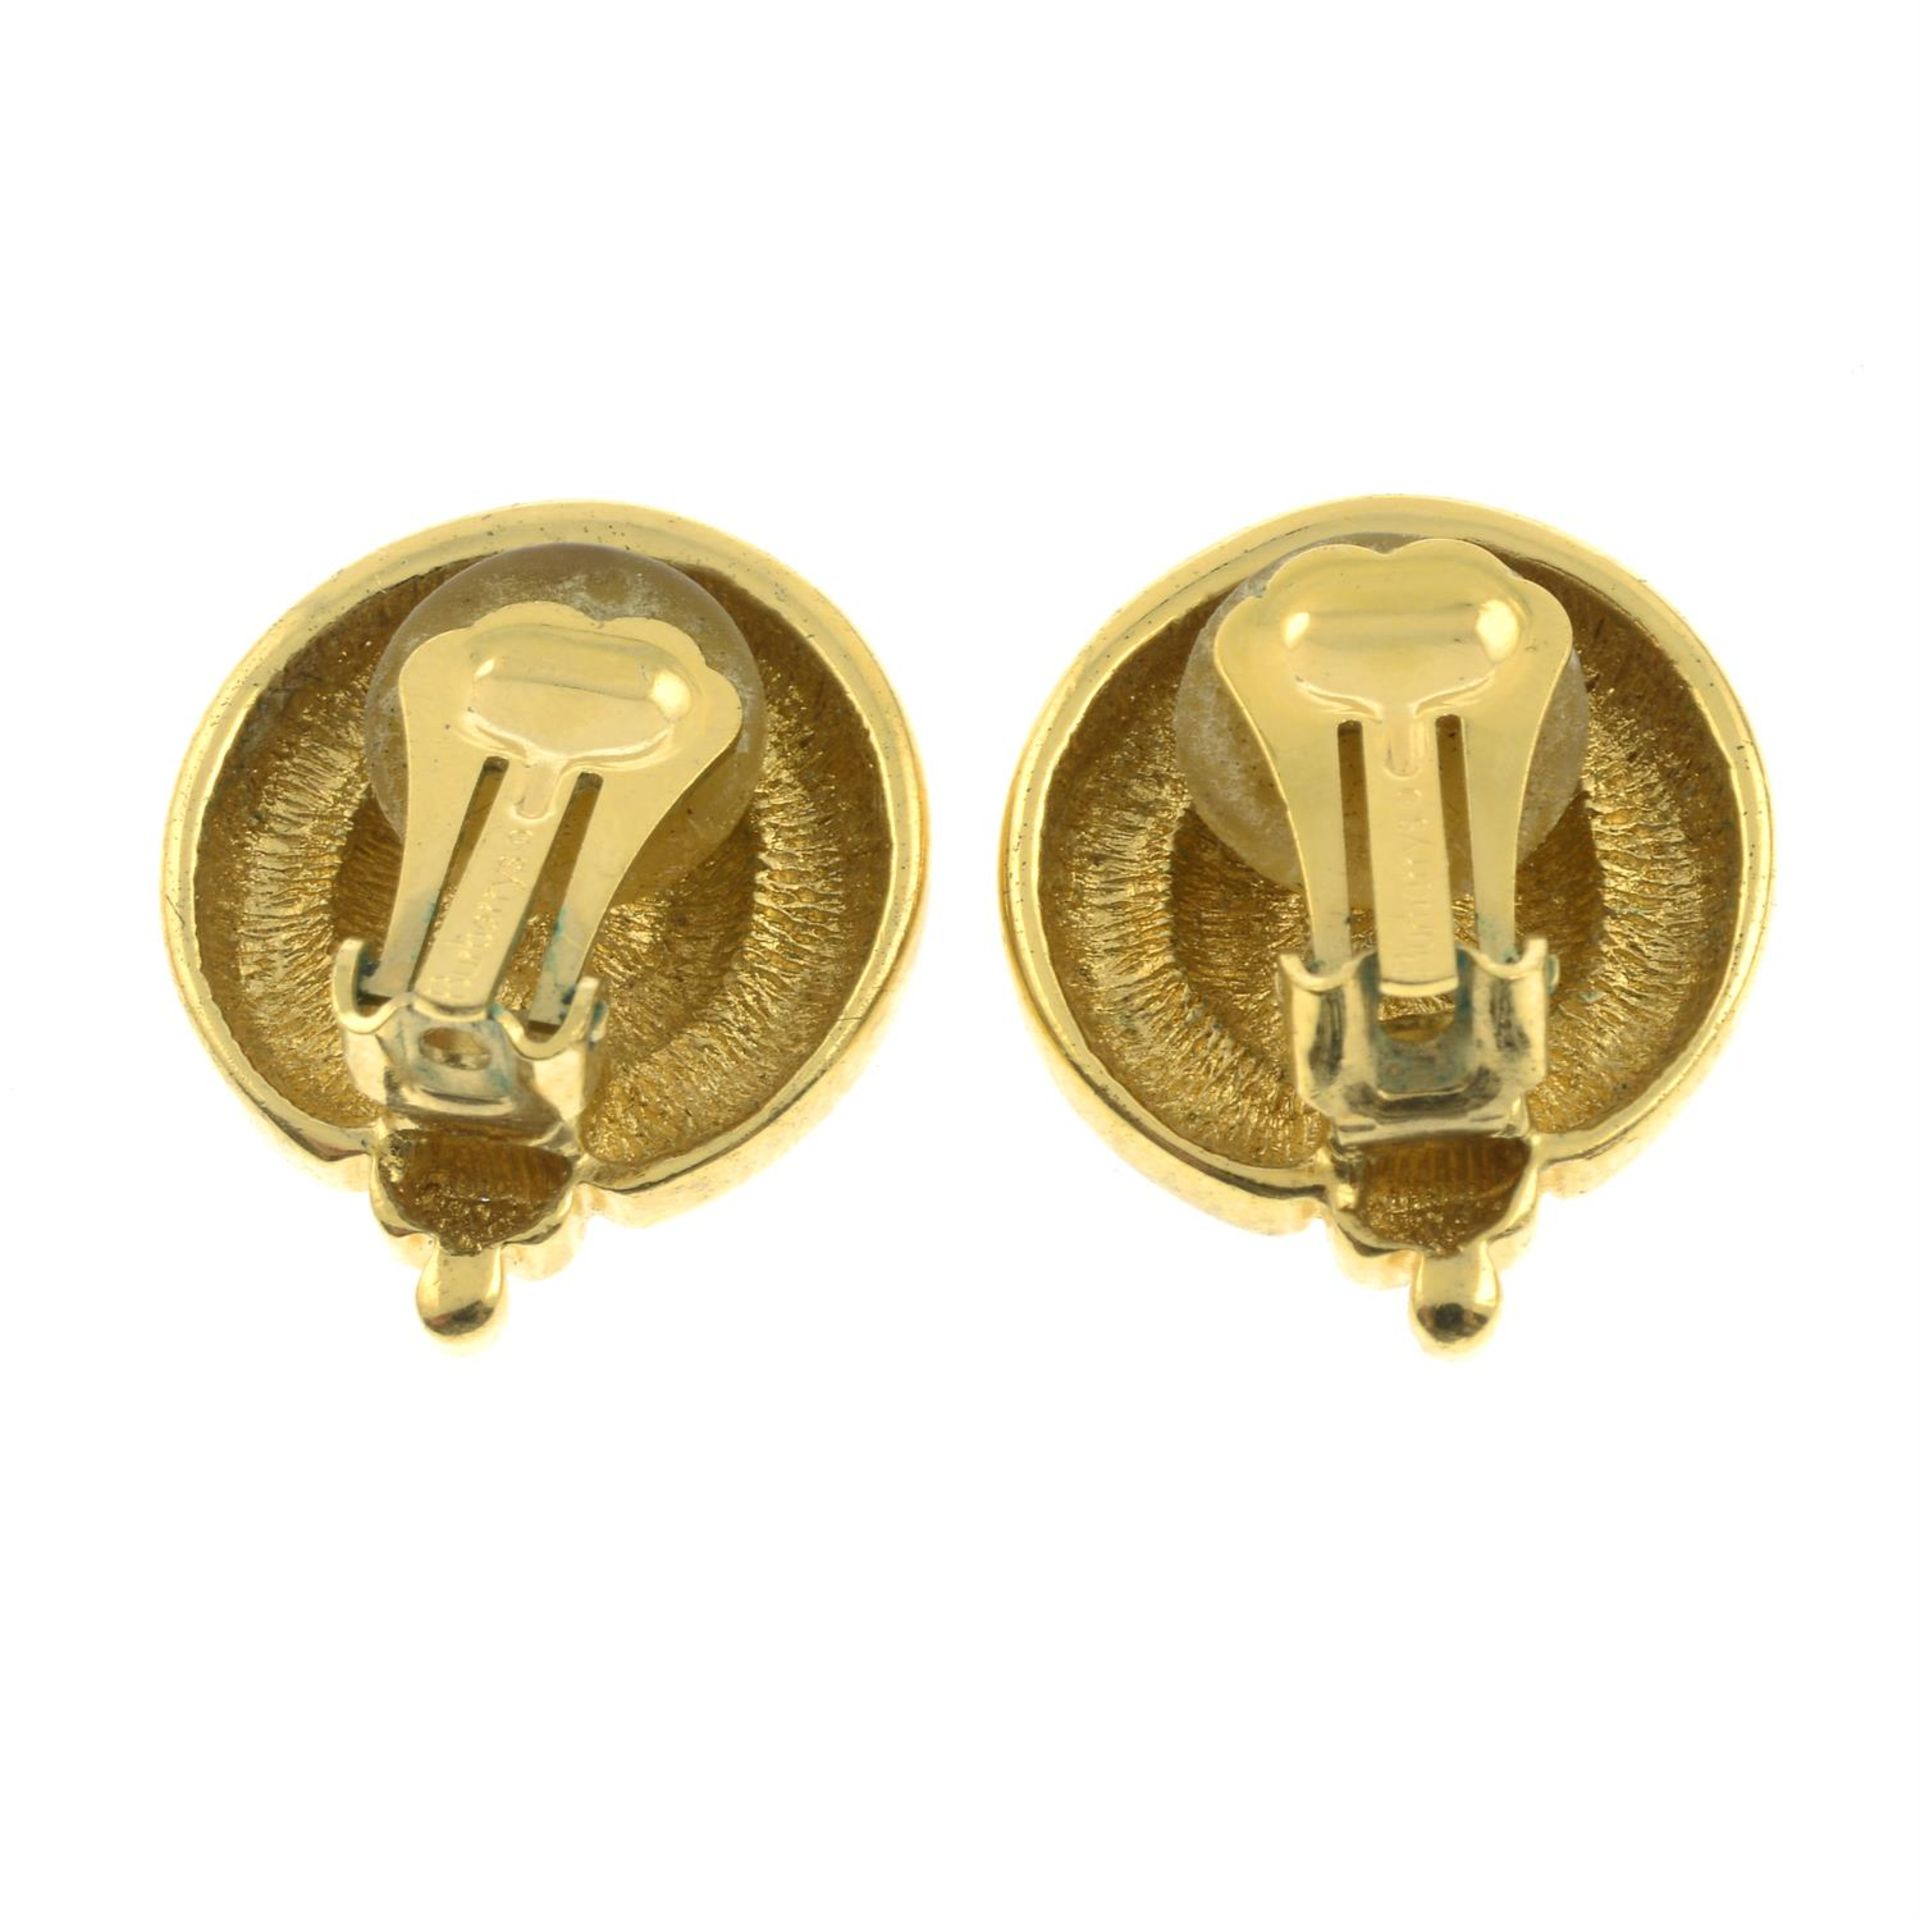 BURBERRY - a pair of clip-on earrings. - Image 2 of 2